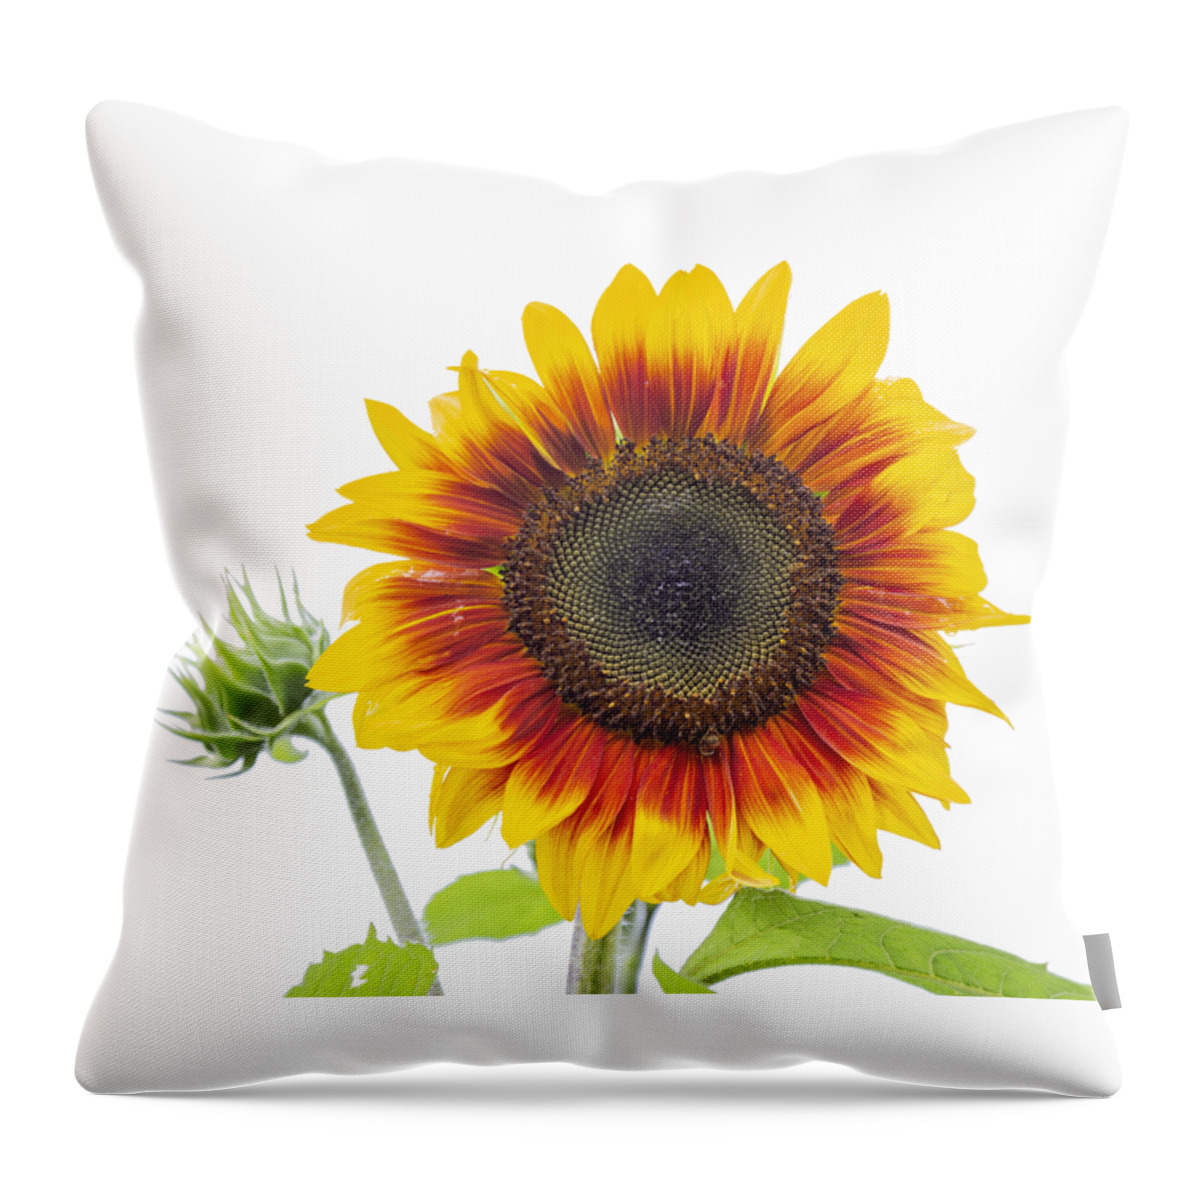 Sunflower Throw Pillow featuring the photograph Sunflower 2018-1 by Thomas Young